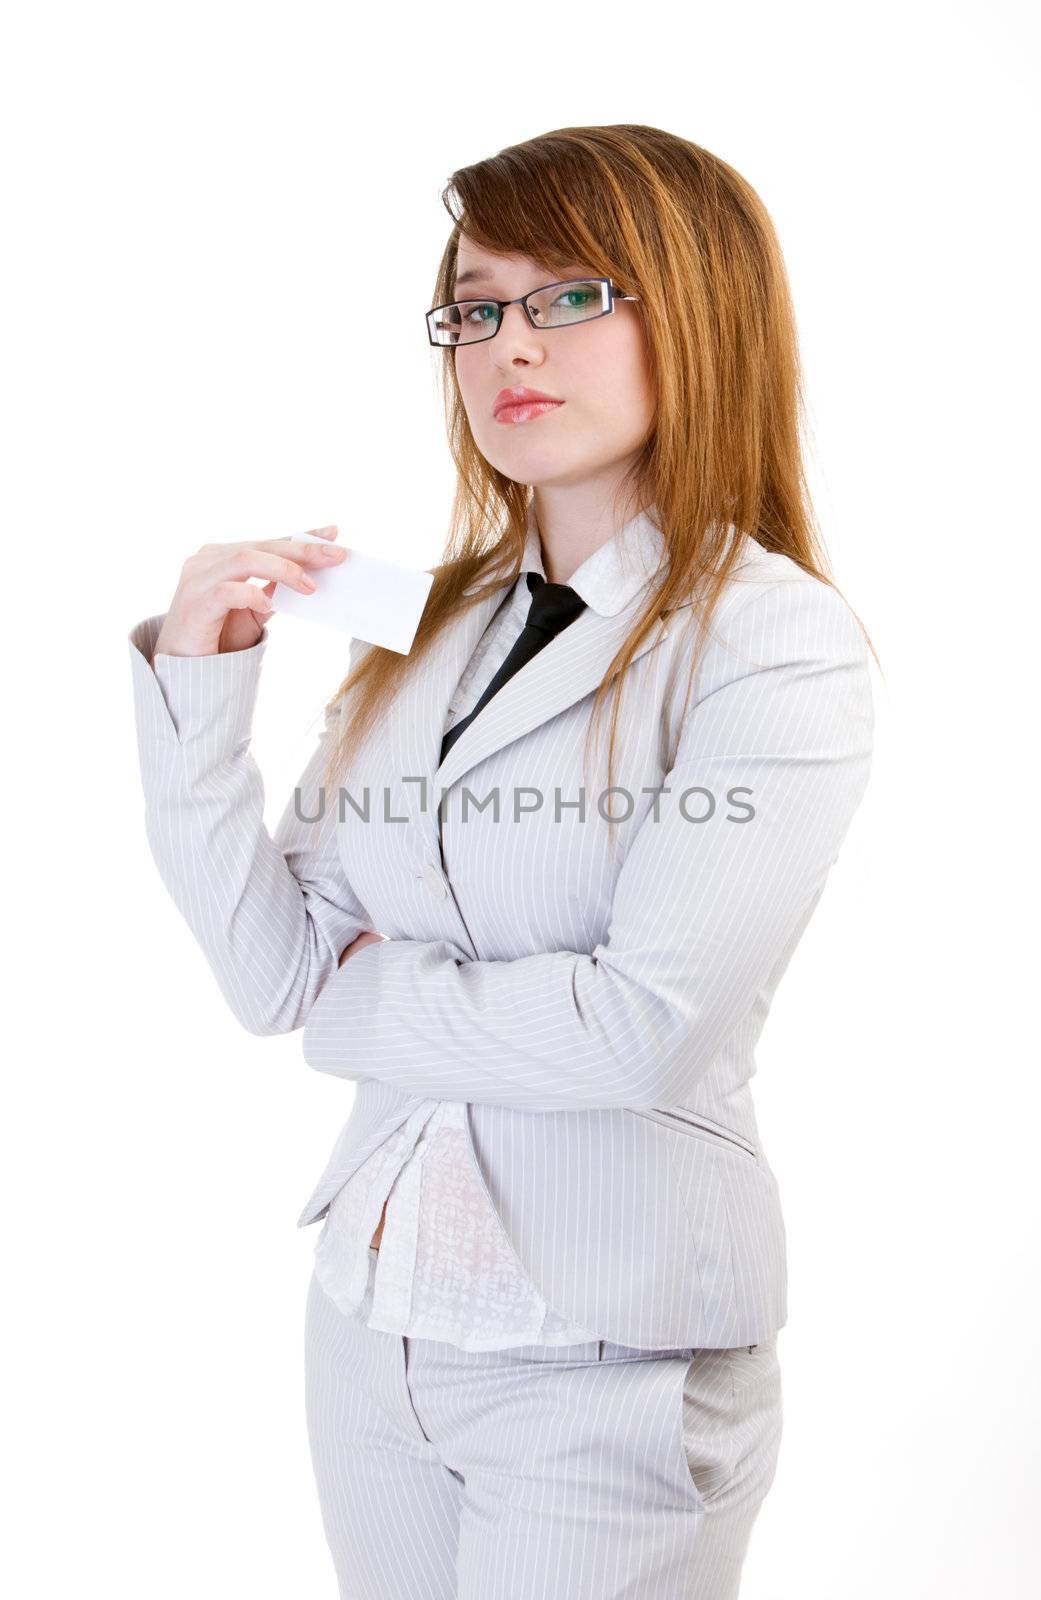 Business woman in a suit on isolated white